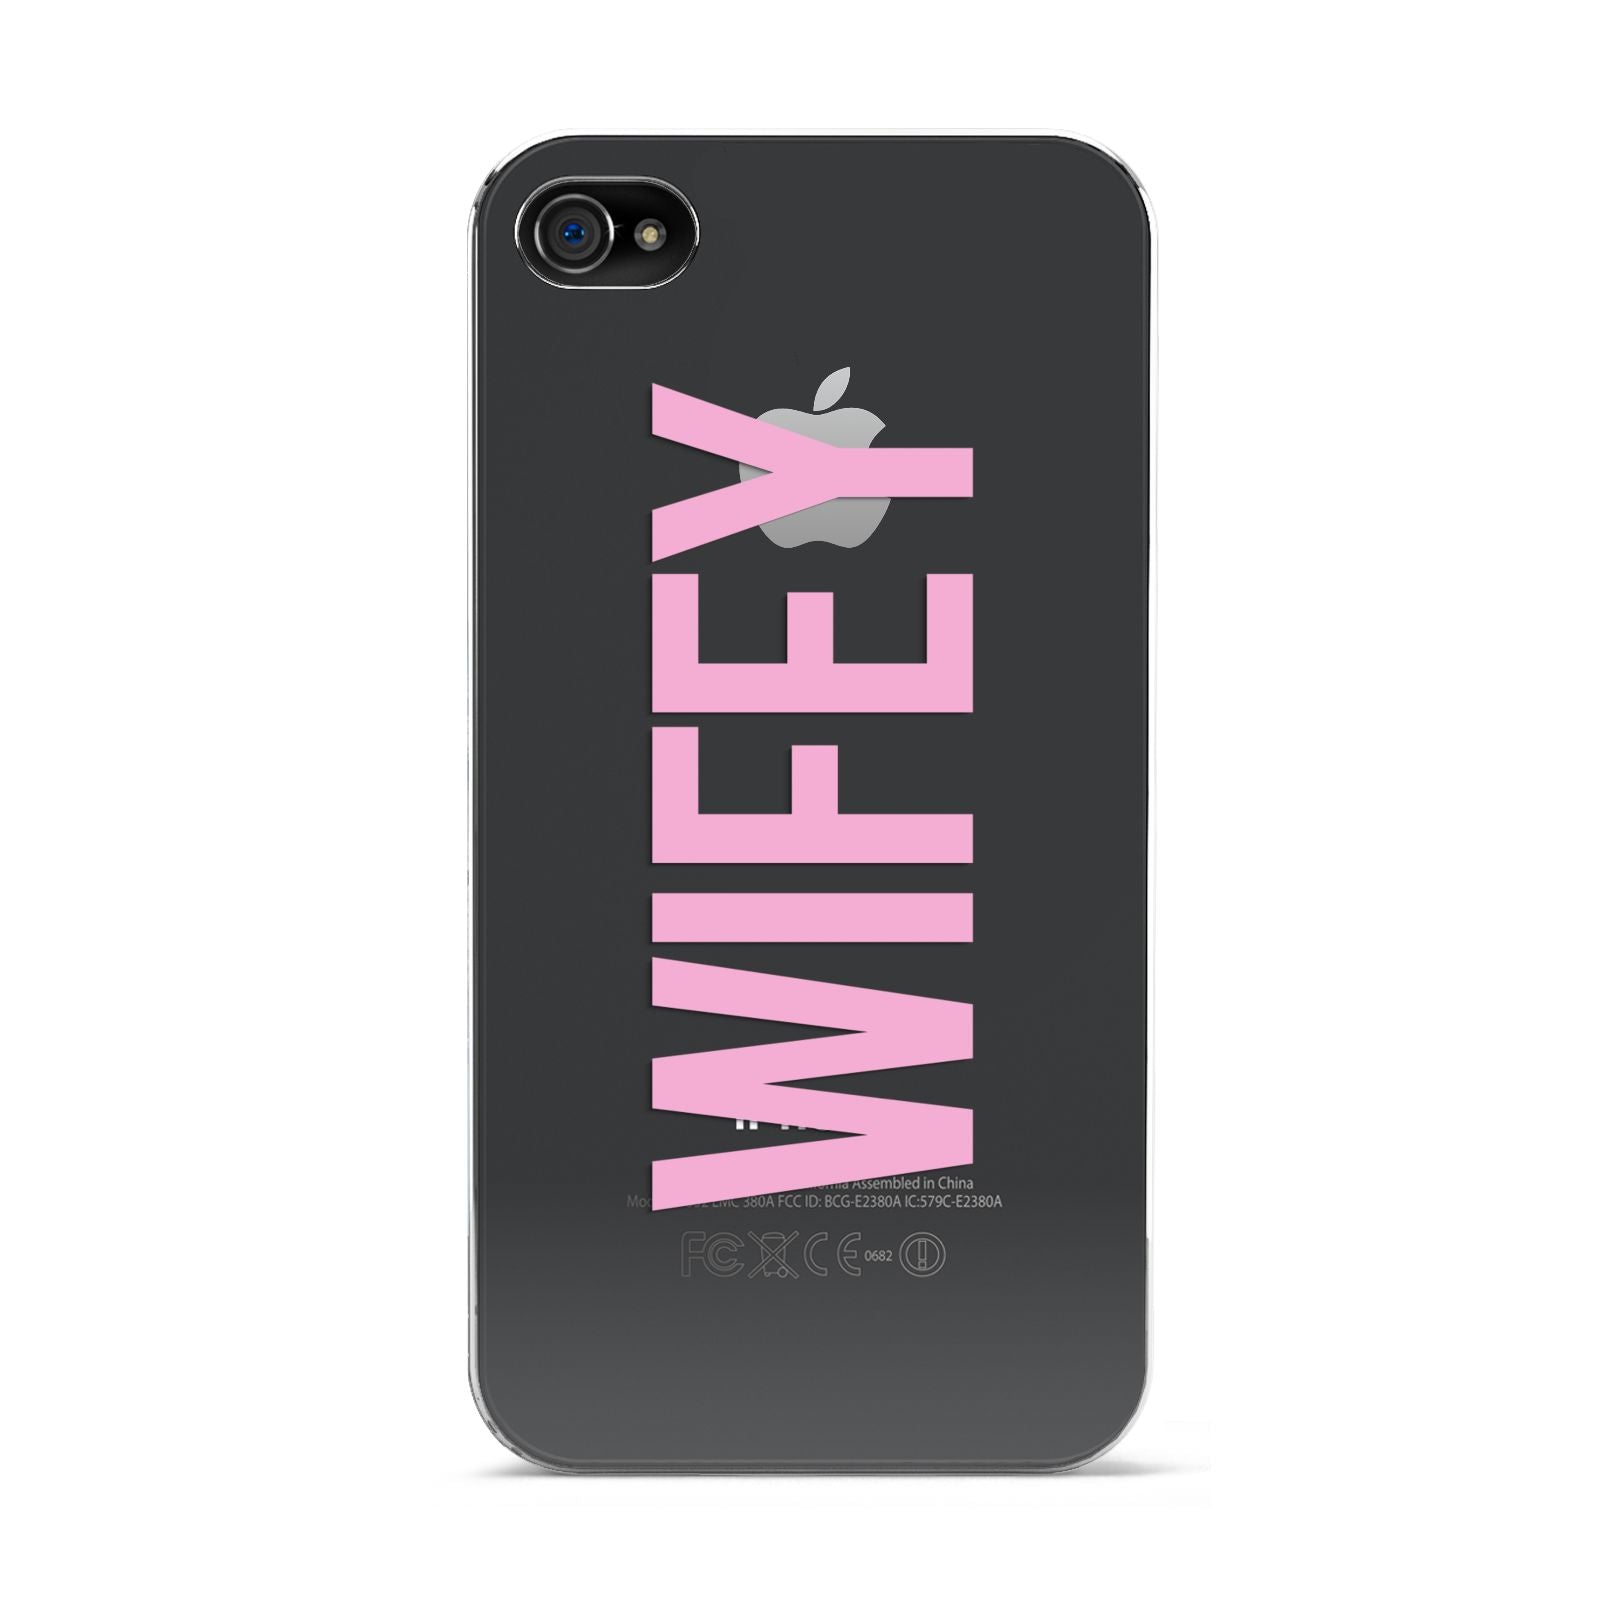 Wifey Pink Apple iPhone 4s Case